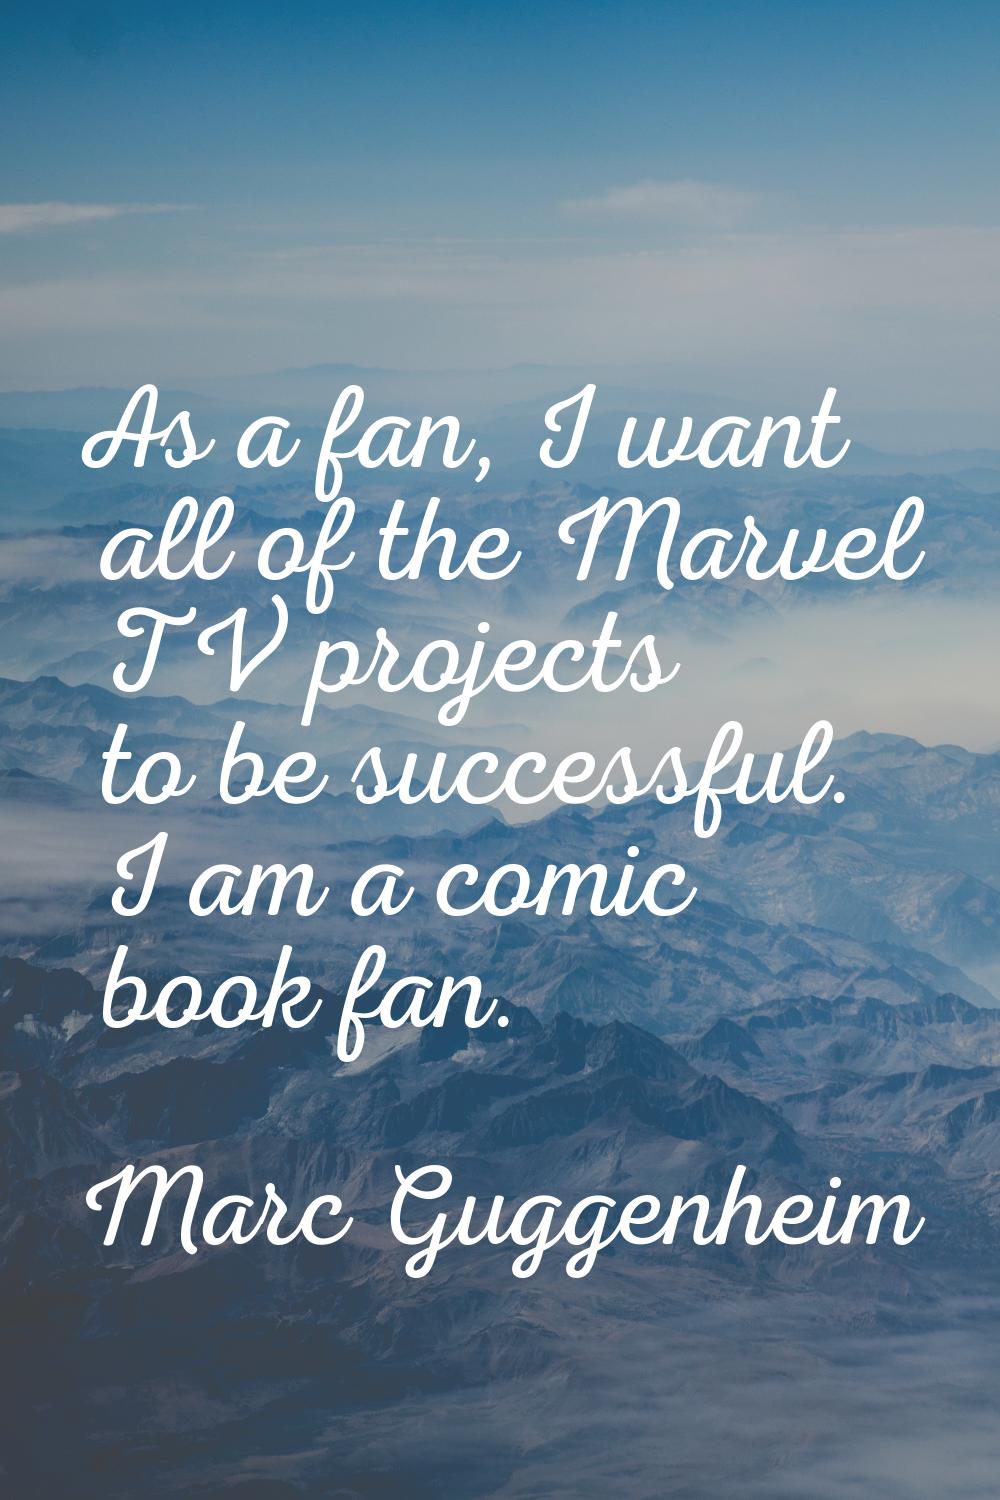 As a fan, I want all of the Marvel TV projects to be successful. I am a comic book fan.